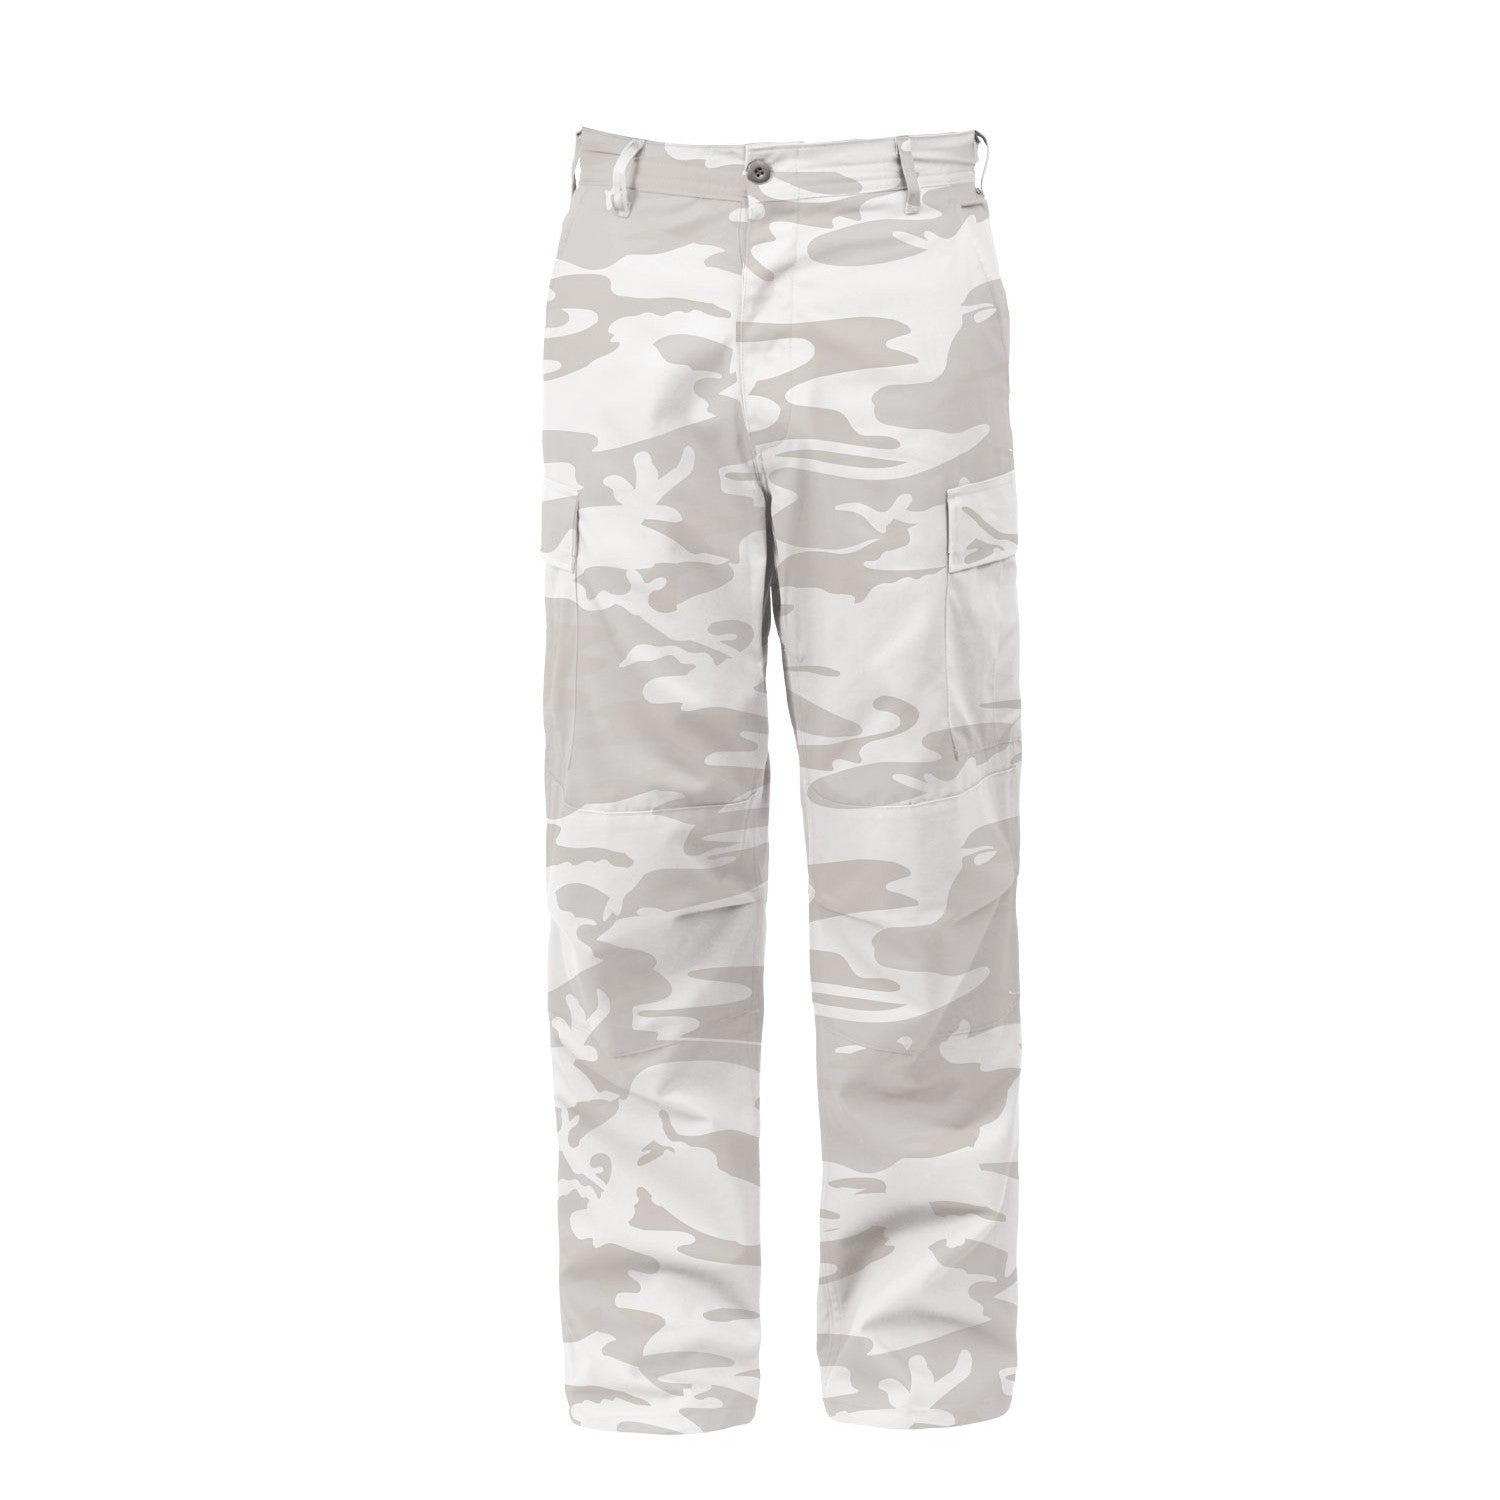 BDU Pants | Tactical Pants For Men | White Camouflage